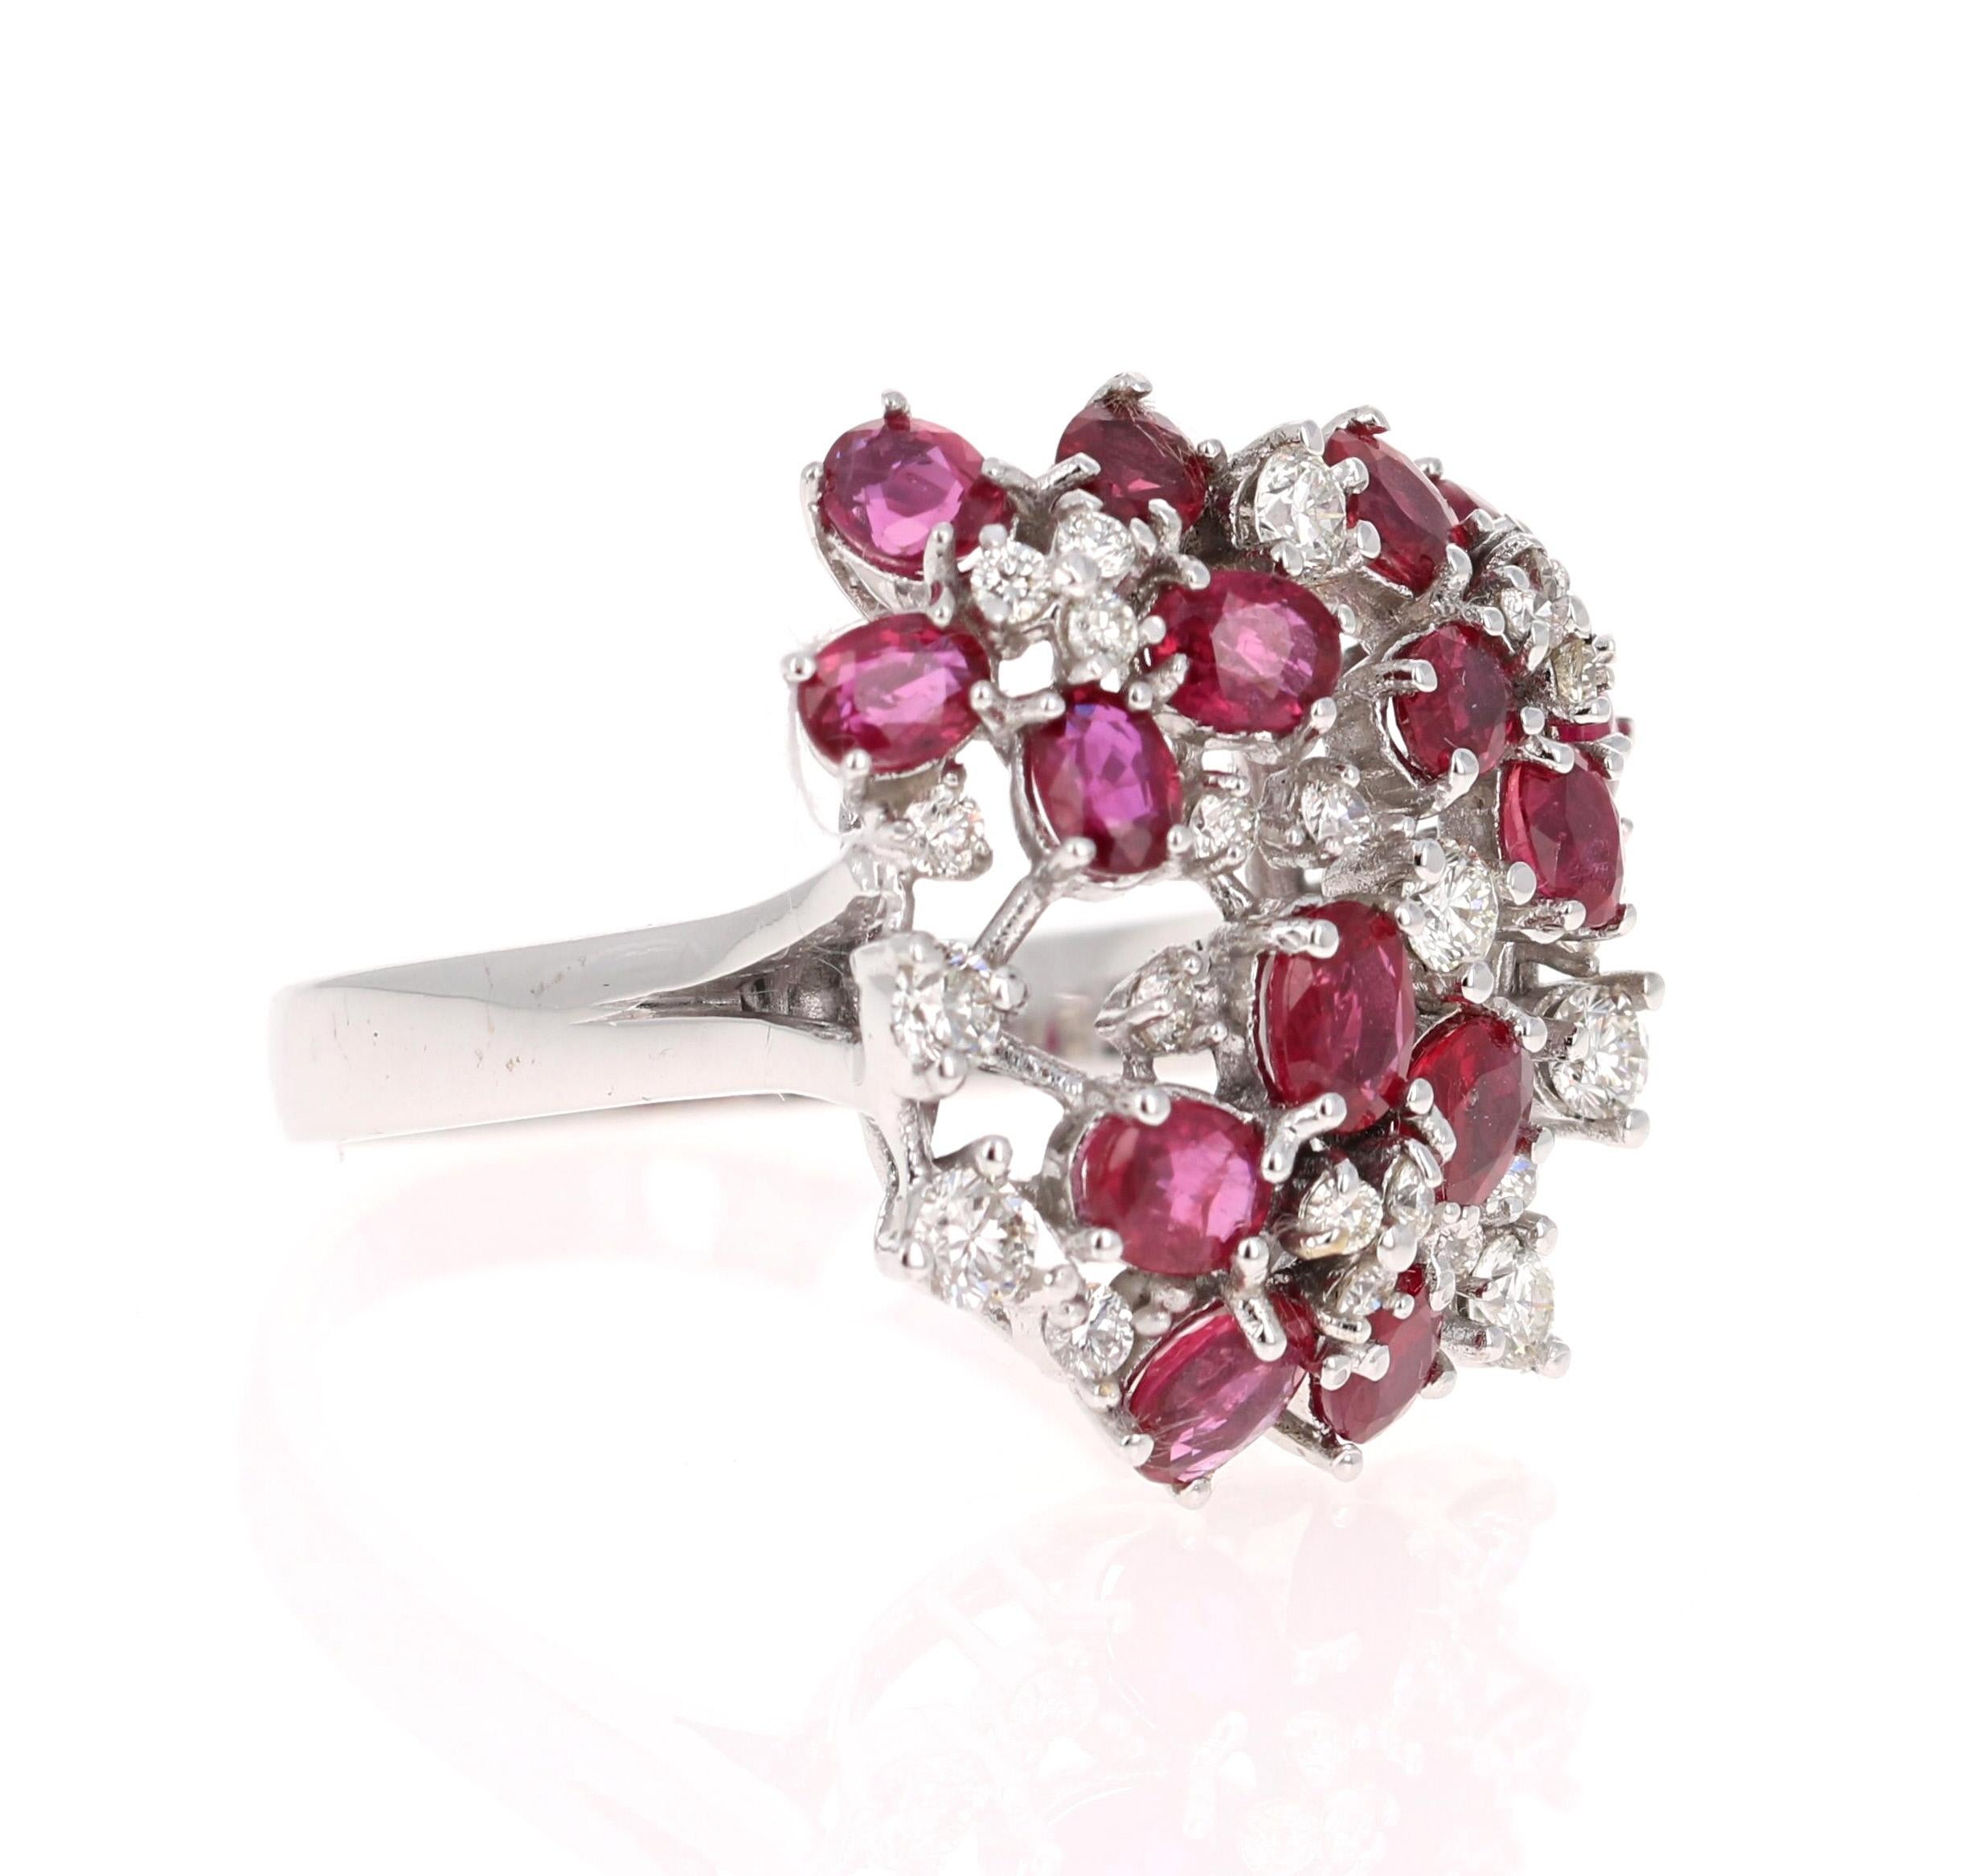 A Statement Ruby & Diamond Ring! 
This ring has multiple Oval Cut Natural Red Rubies weighing 2.72 Carats and 25 Round Cut Diamonds embellished around weighing 0.64 Carats. The clarity and color of the diamonds are SI1-F. 

The ring is beautifully